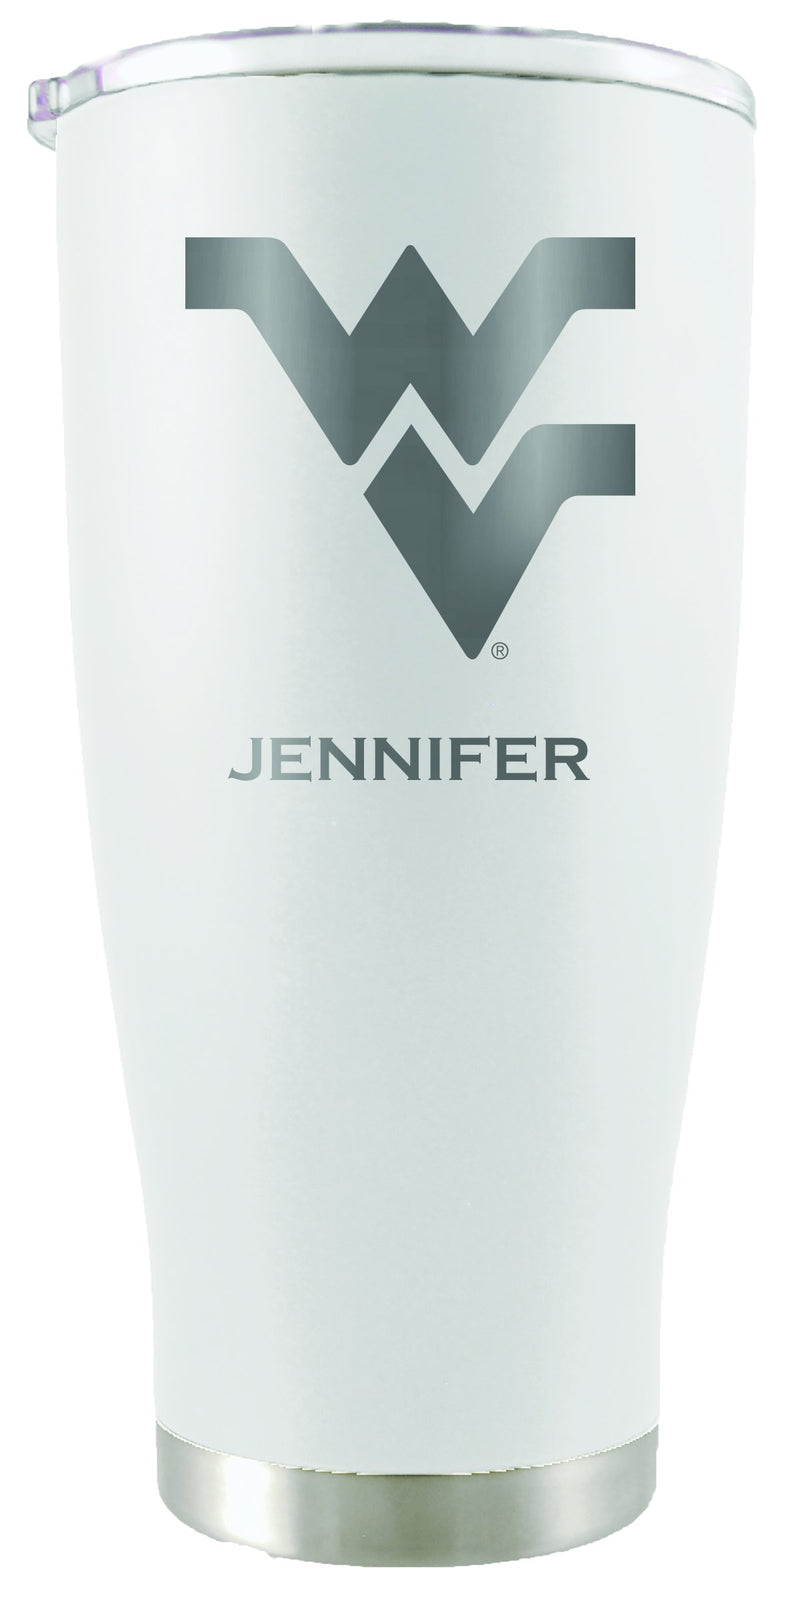 20oz White Personalized Stainless Steel Tumbler | West Virginia
COL, CurrentProduct, Drinkware_category_All, Personalized_Personalized, West Virginia Mountaineers, WVI
The Memory Company